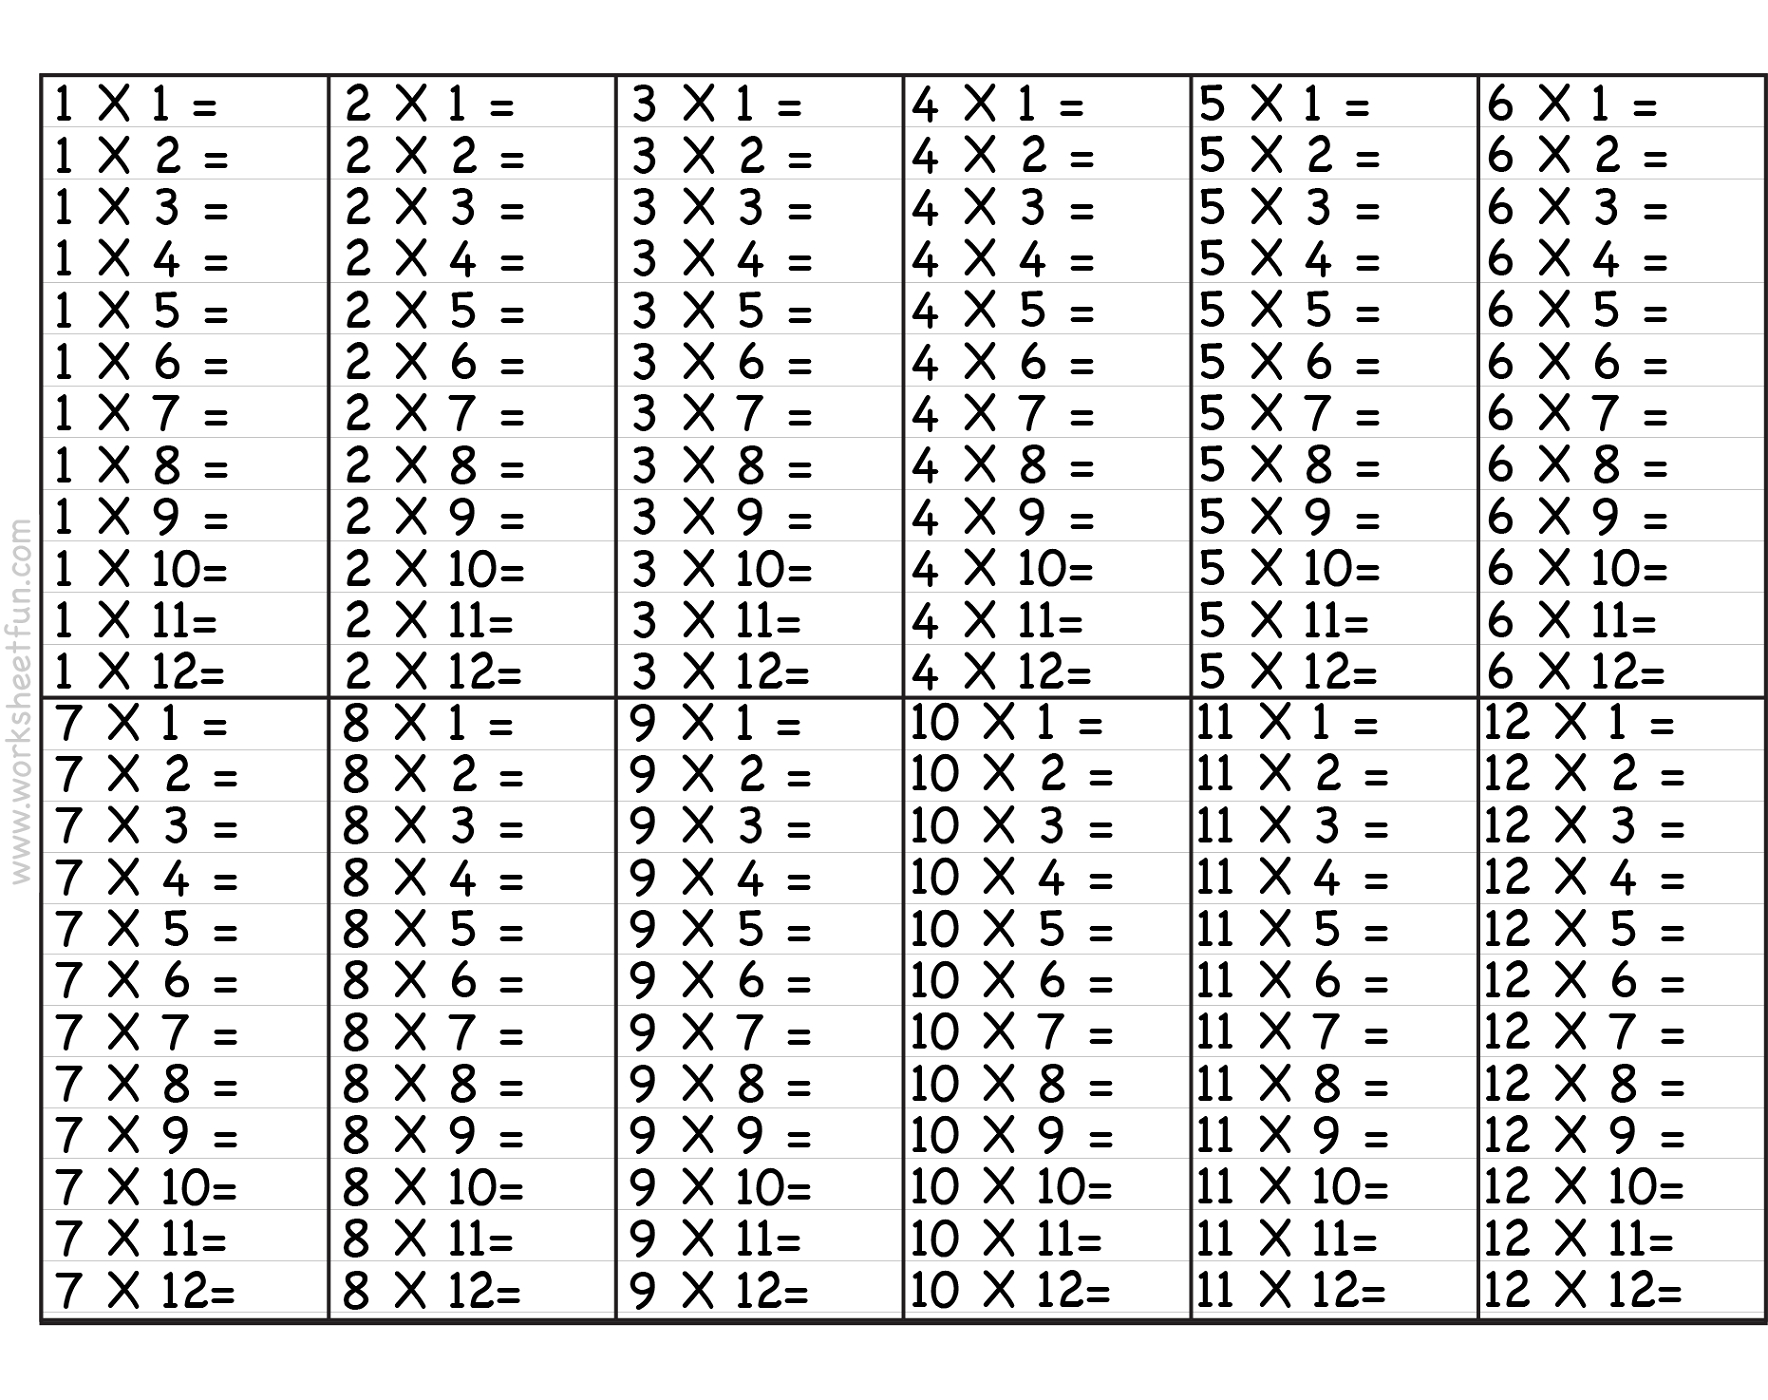 12 Times Tables Worksheets | Multiplication Chart regarding Printable Multiplication Table Of 12